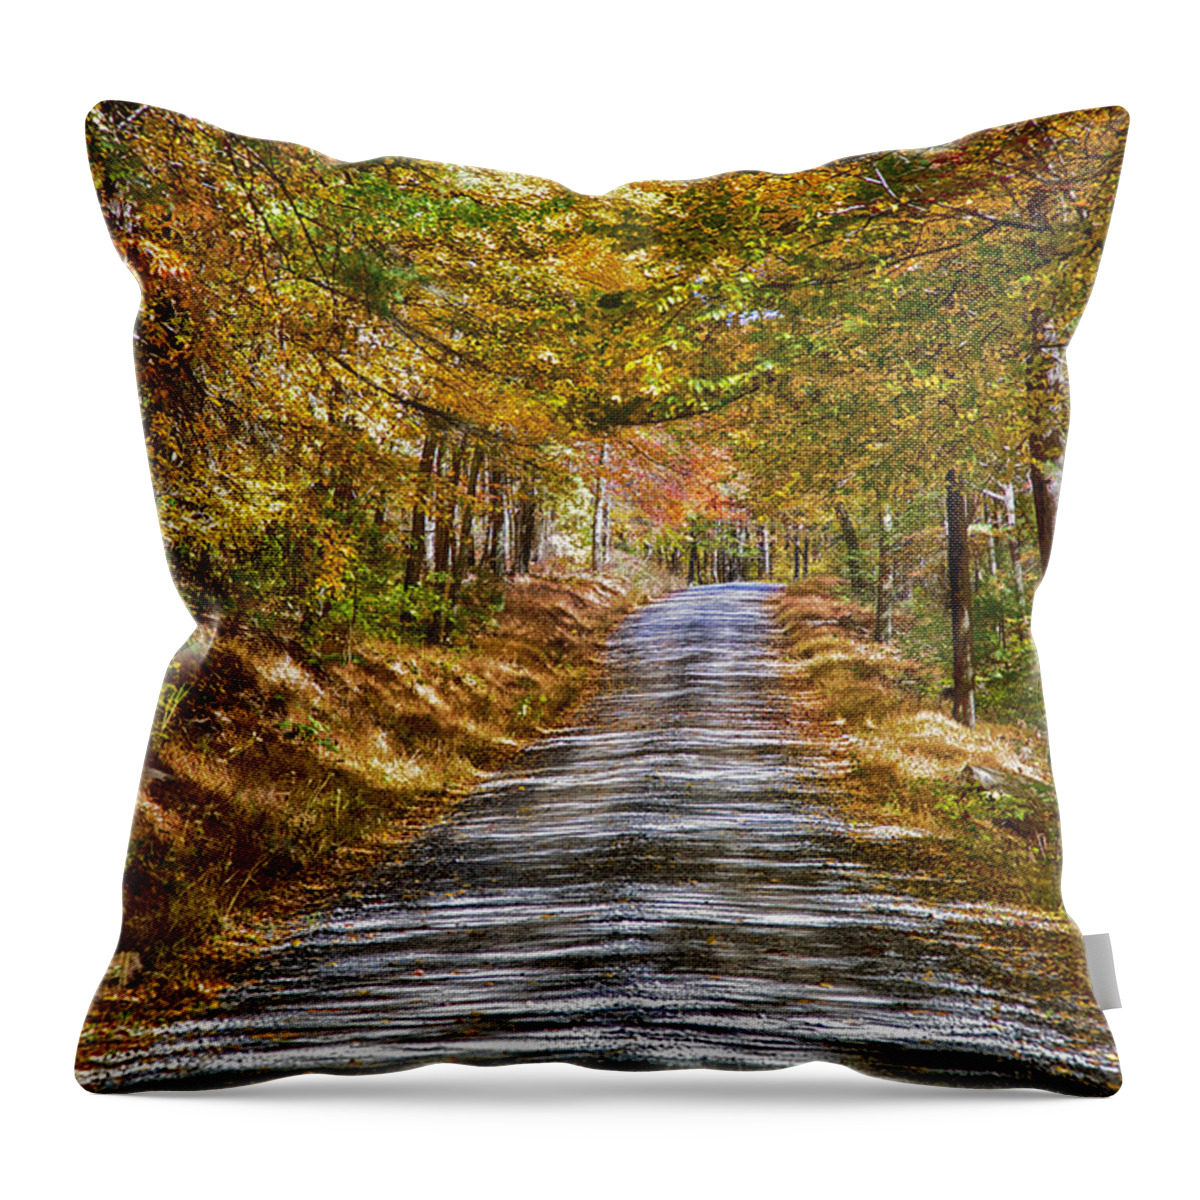 Road Throw Pillow featuring the photograph Dirt Road by Hugh Smith